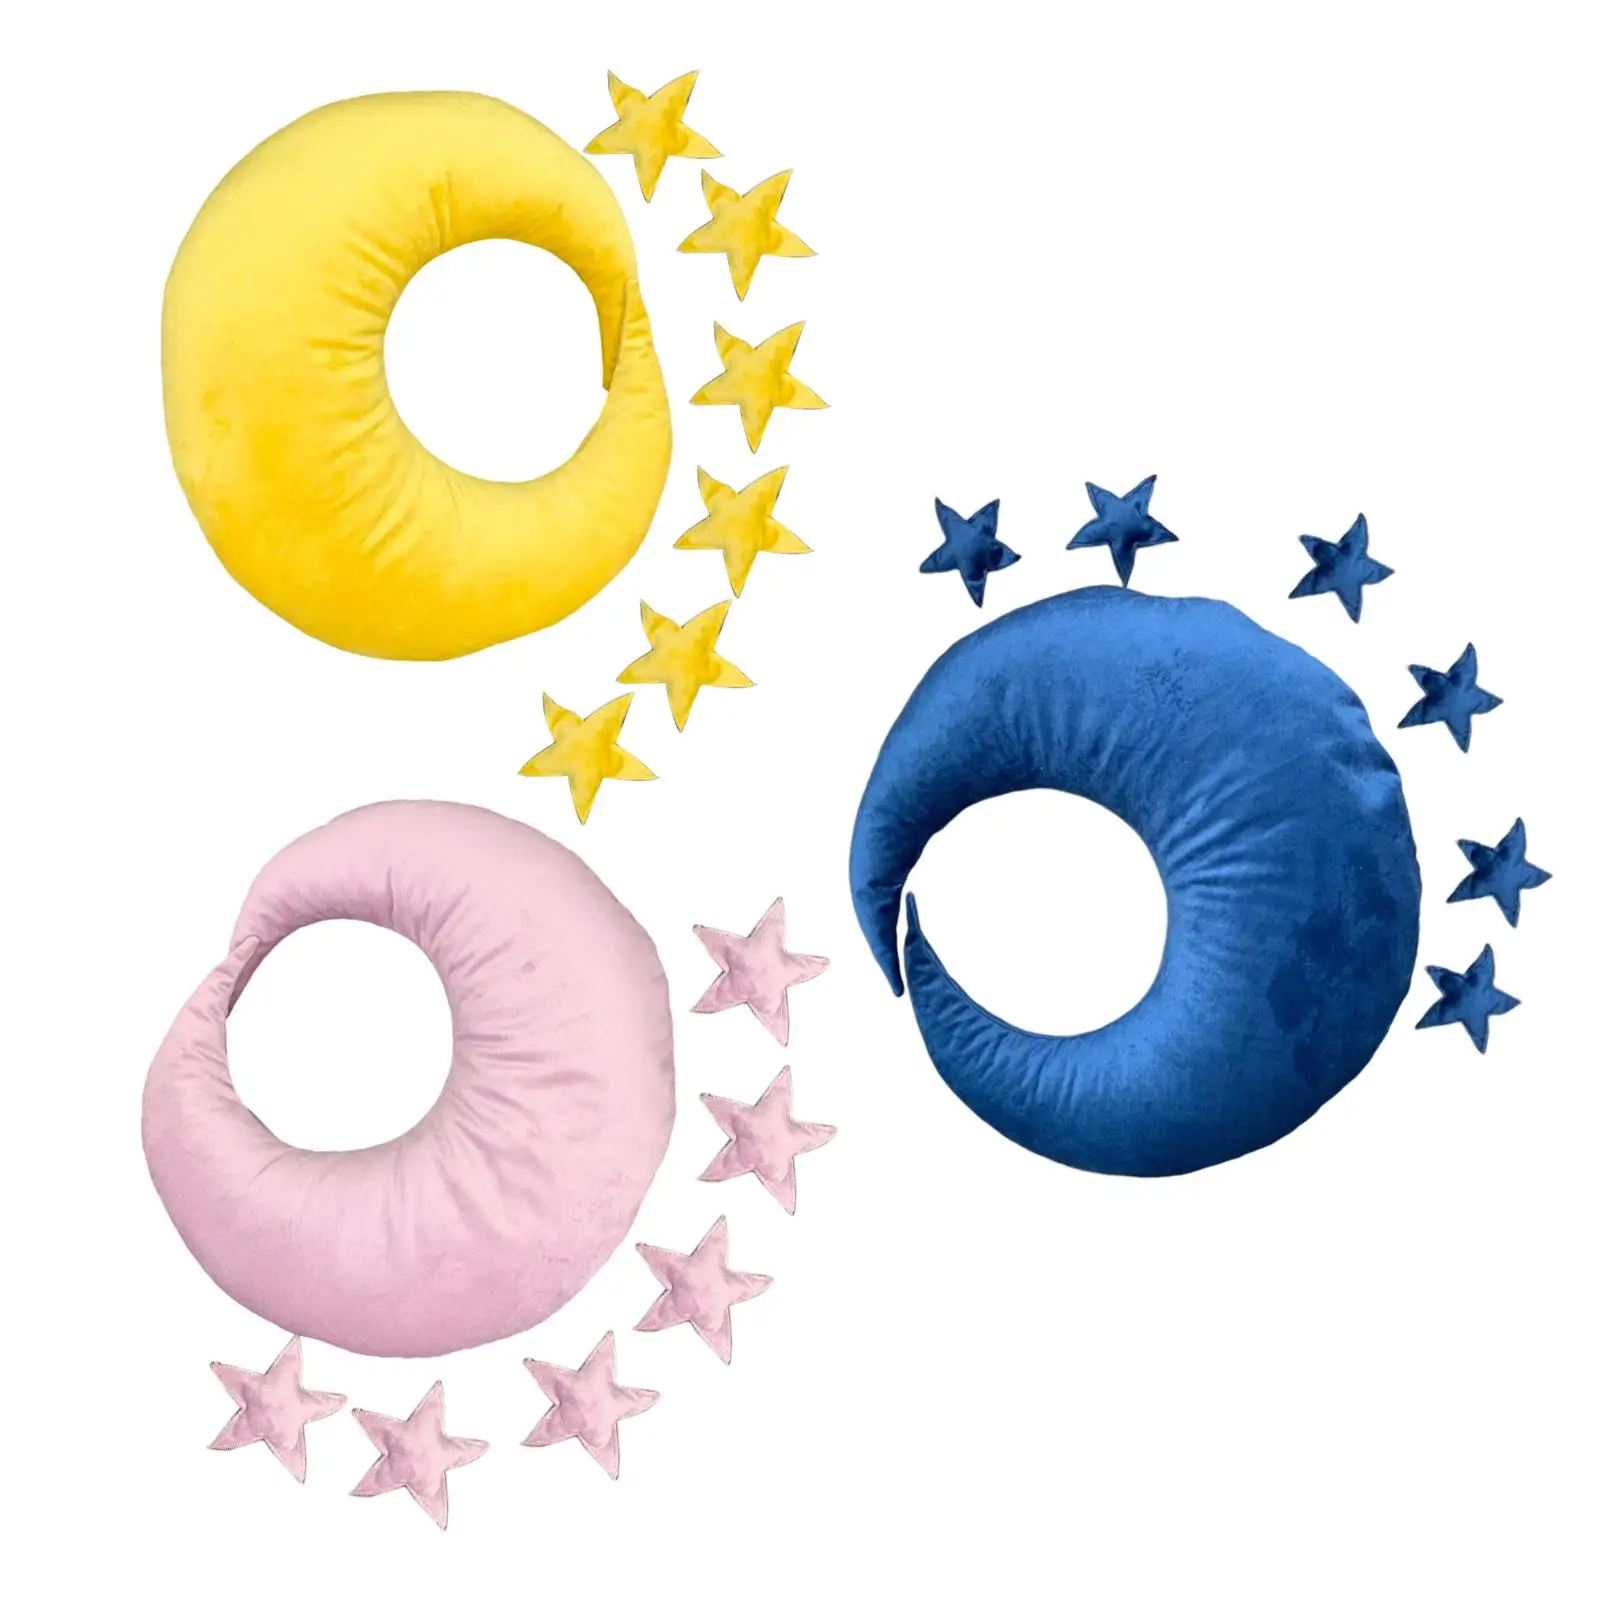 Baby Photo Prop Moon Shape Pillow Mini Photo Props Photography Accessories for Twins Princess